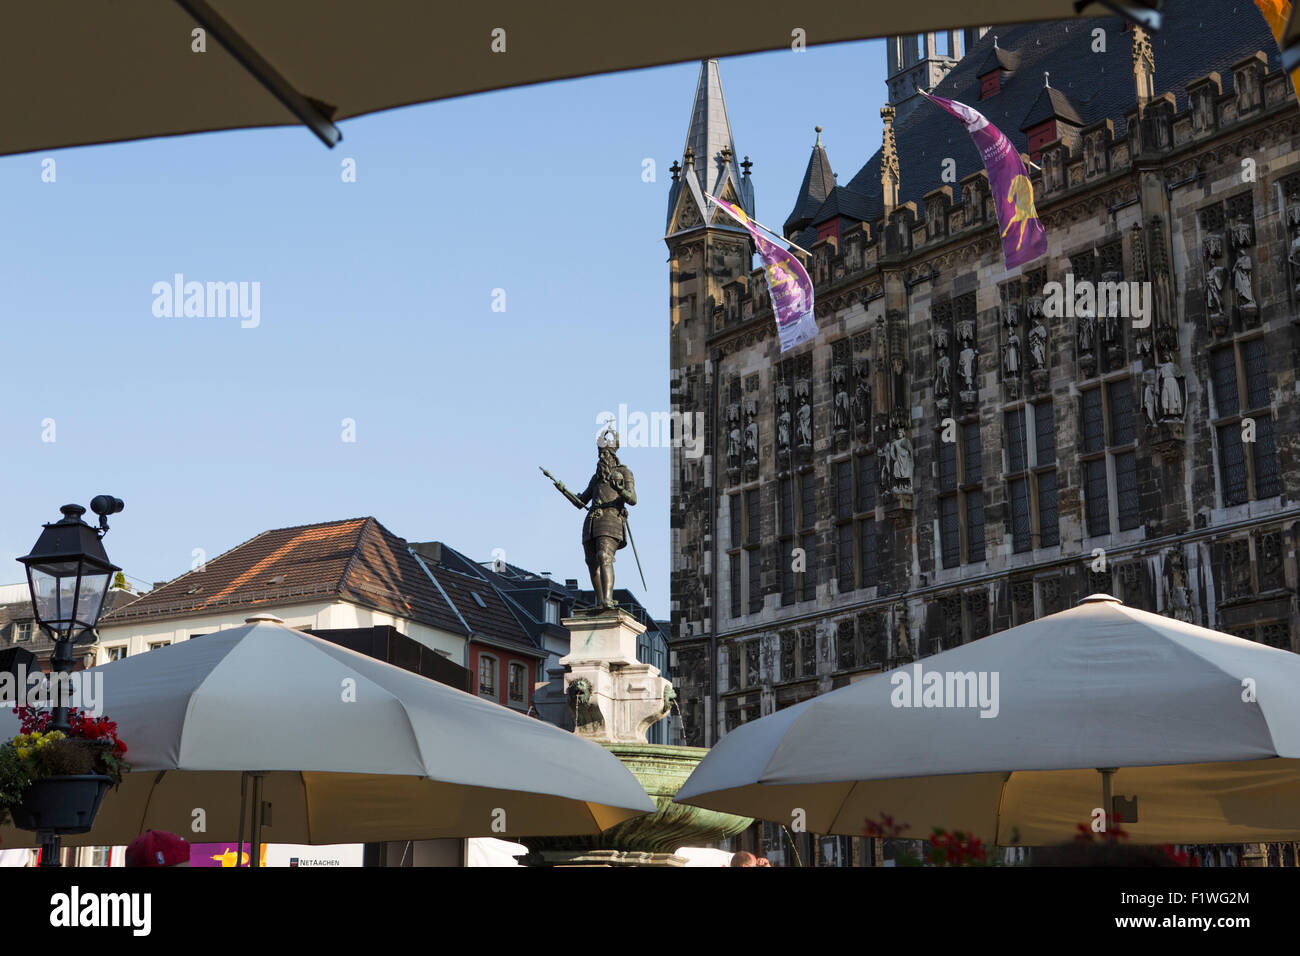 Aachen market square with the statue of Charlemagne and the town-hall in the background Stock Photo